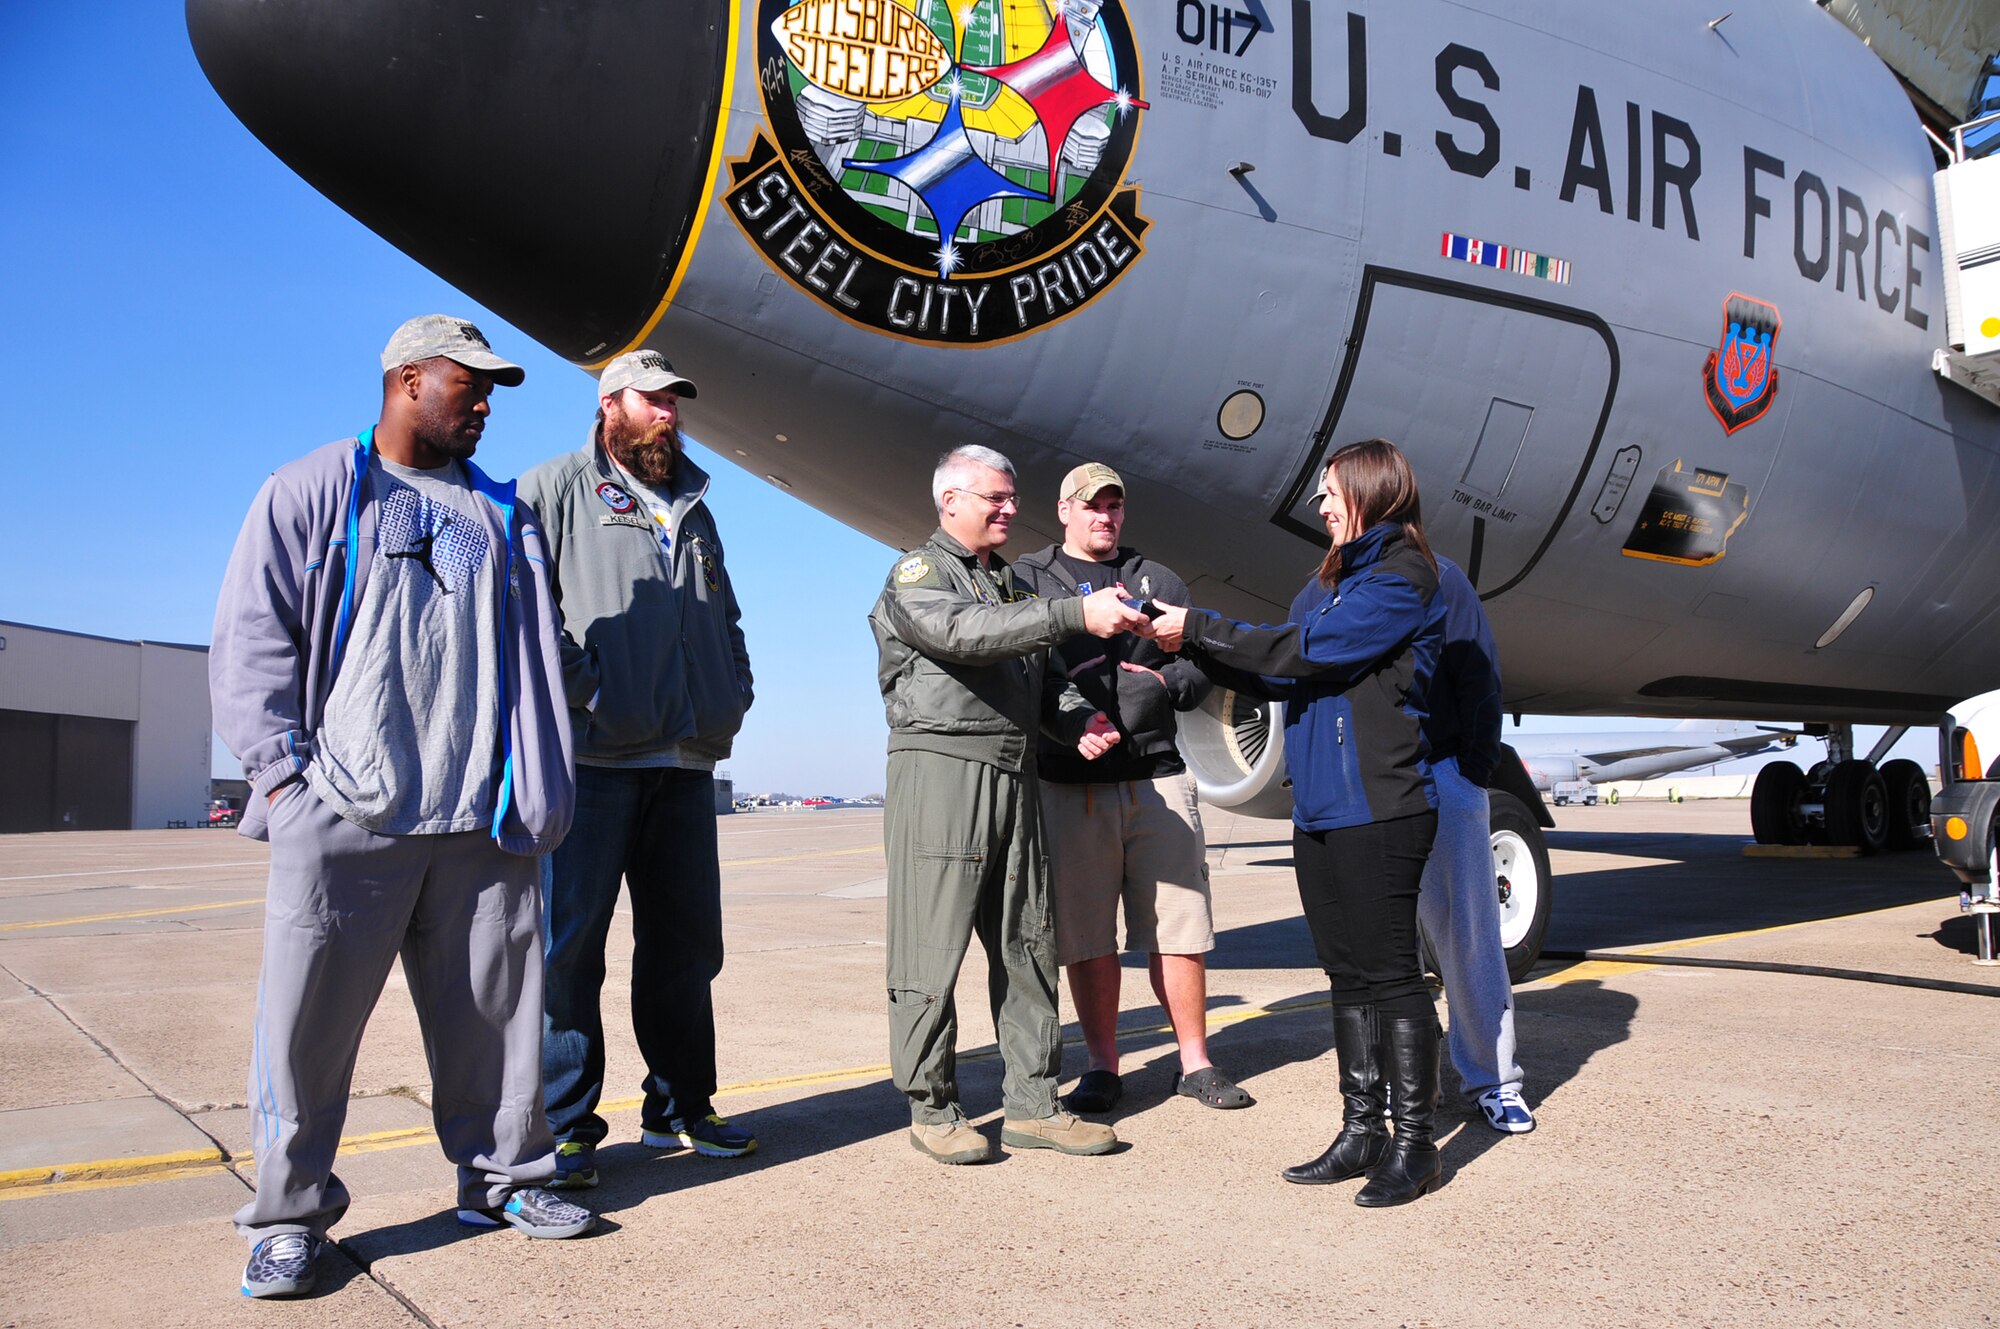 Four players from the Pittsburgh Steelers: Jonathan Dwyer, James Harrison, Brett Keisel and Doug Legursky visit the 171st Air Refueling Wing, November 6.  The visit, part of the "Salute to Service" campaign, is sponsored by the NFL in conjunction with USAA.  The NFL is also paying tribute to the Armed Forces throughout the month of November.  During the visit, the players take time to autograph one of the unit's KC-135 aircraft, Steel City Pride.
	
The Salute to Service campaign aligns with the NFL's long history of supporting America's armed services, including a partnership of more than 45 years with the USO that includes overseas visits to troops and trips to military hospitals nationwide. 

During the Pittsburgh Steelers' November 12 game, the Steelers will honor a veteran from every war, and recognize a local Harrier pilot who was shot down and killed last month over Afghanistan. The Steelers will also recognize their local military community by paying tribute to the service men and women of the 171st Air Refueling Wing. The team is partnering with USAA for a stadium-wide card stunt that features a special military appreciation message during the National Anthem. Fans will be instructed to hold up the card at their seats just before the National Anthem. 

(National Guard photo by Master Sgt. Ann Young/released)
